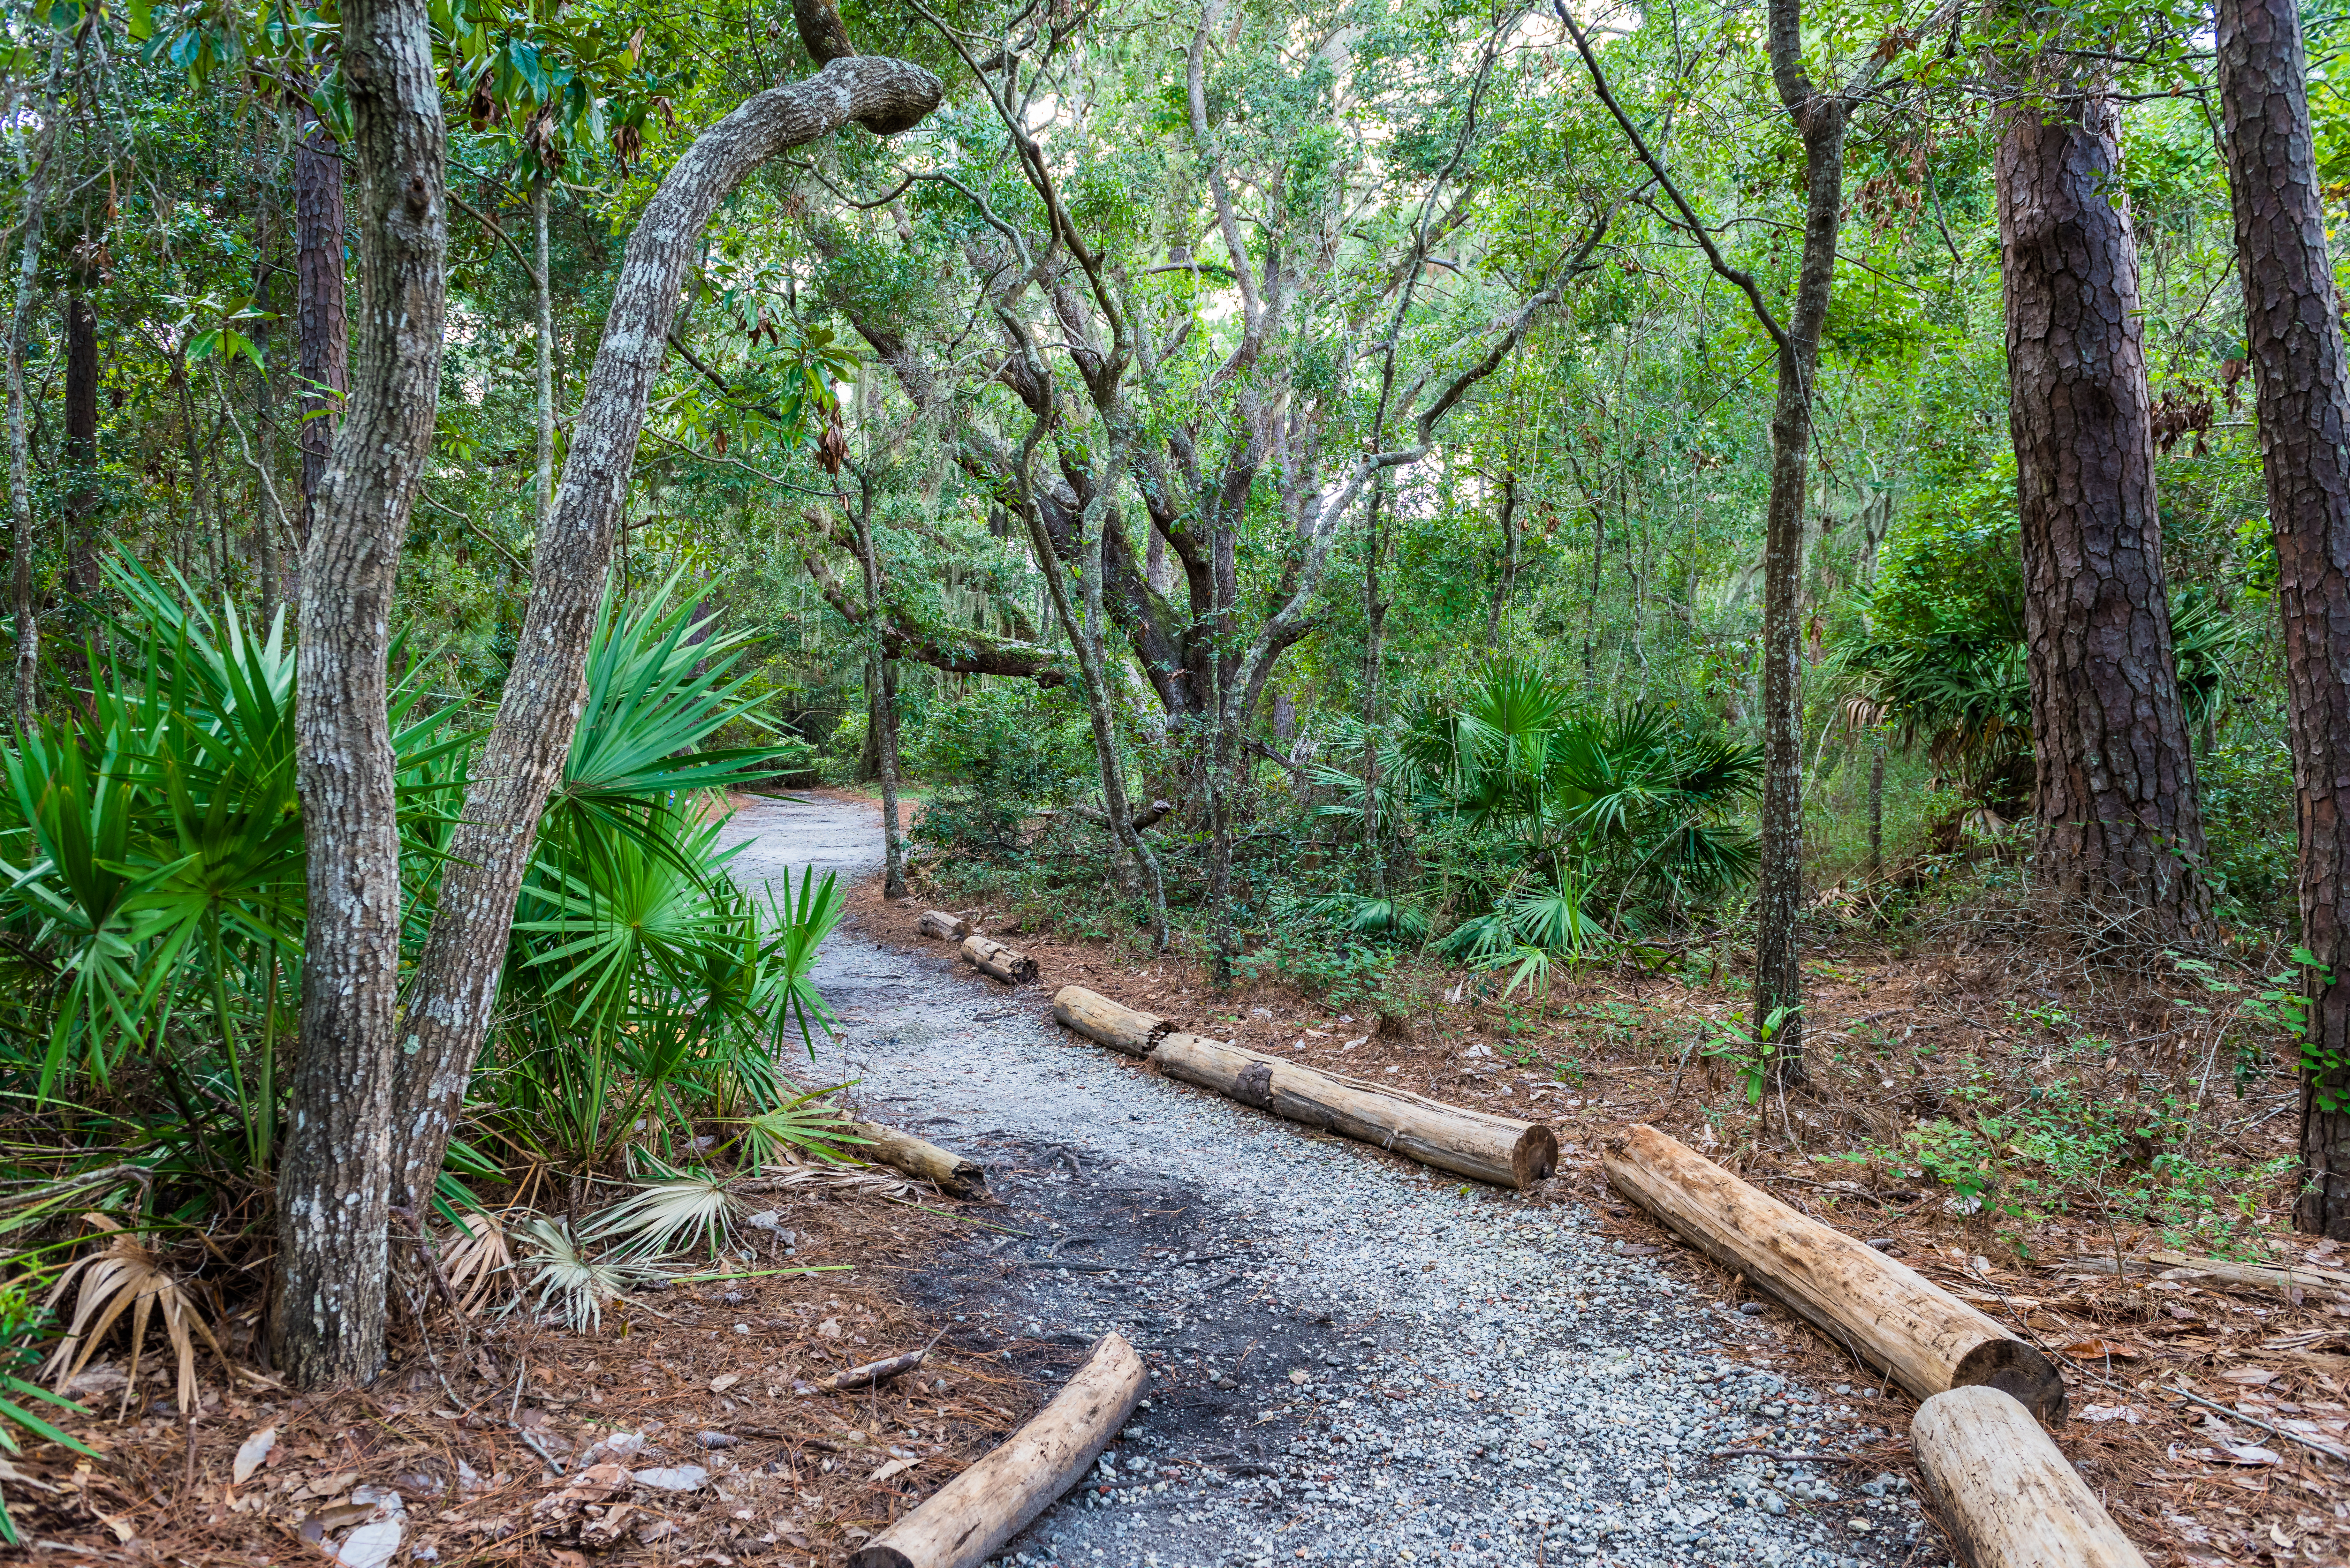 The John Gilbert Nature Trail winds through ancient maritime forest on St. Simons Island, Georgia